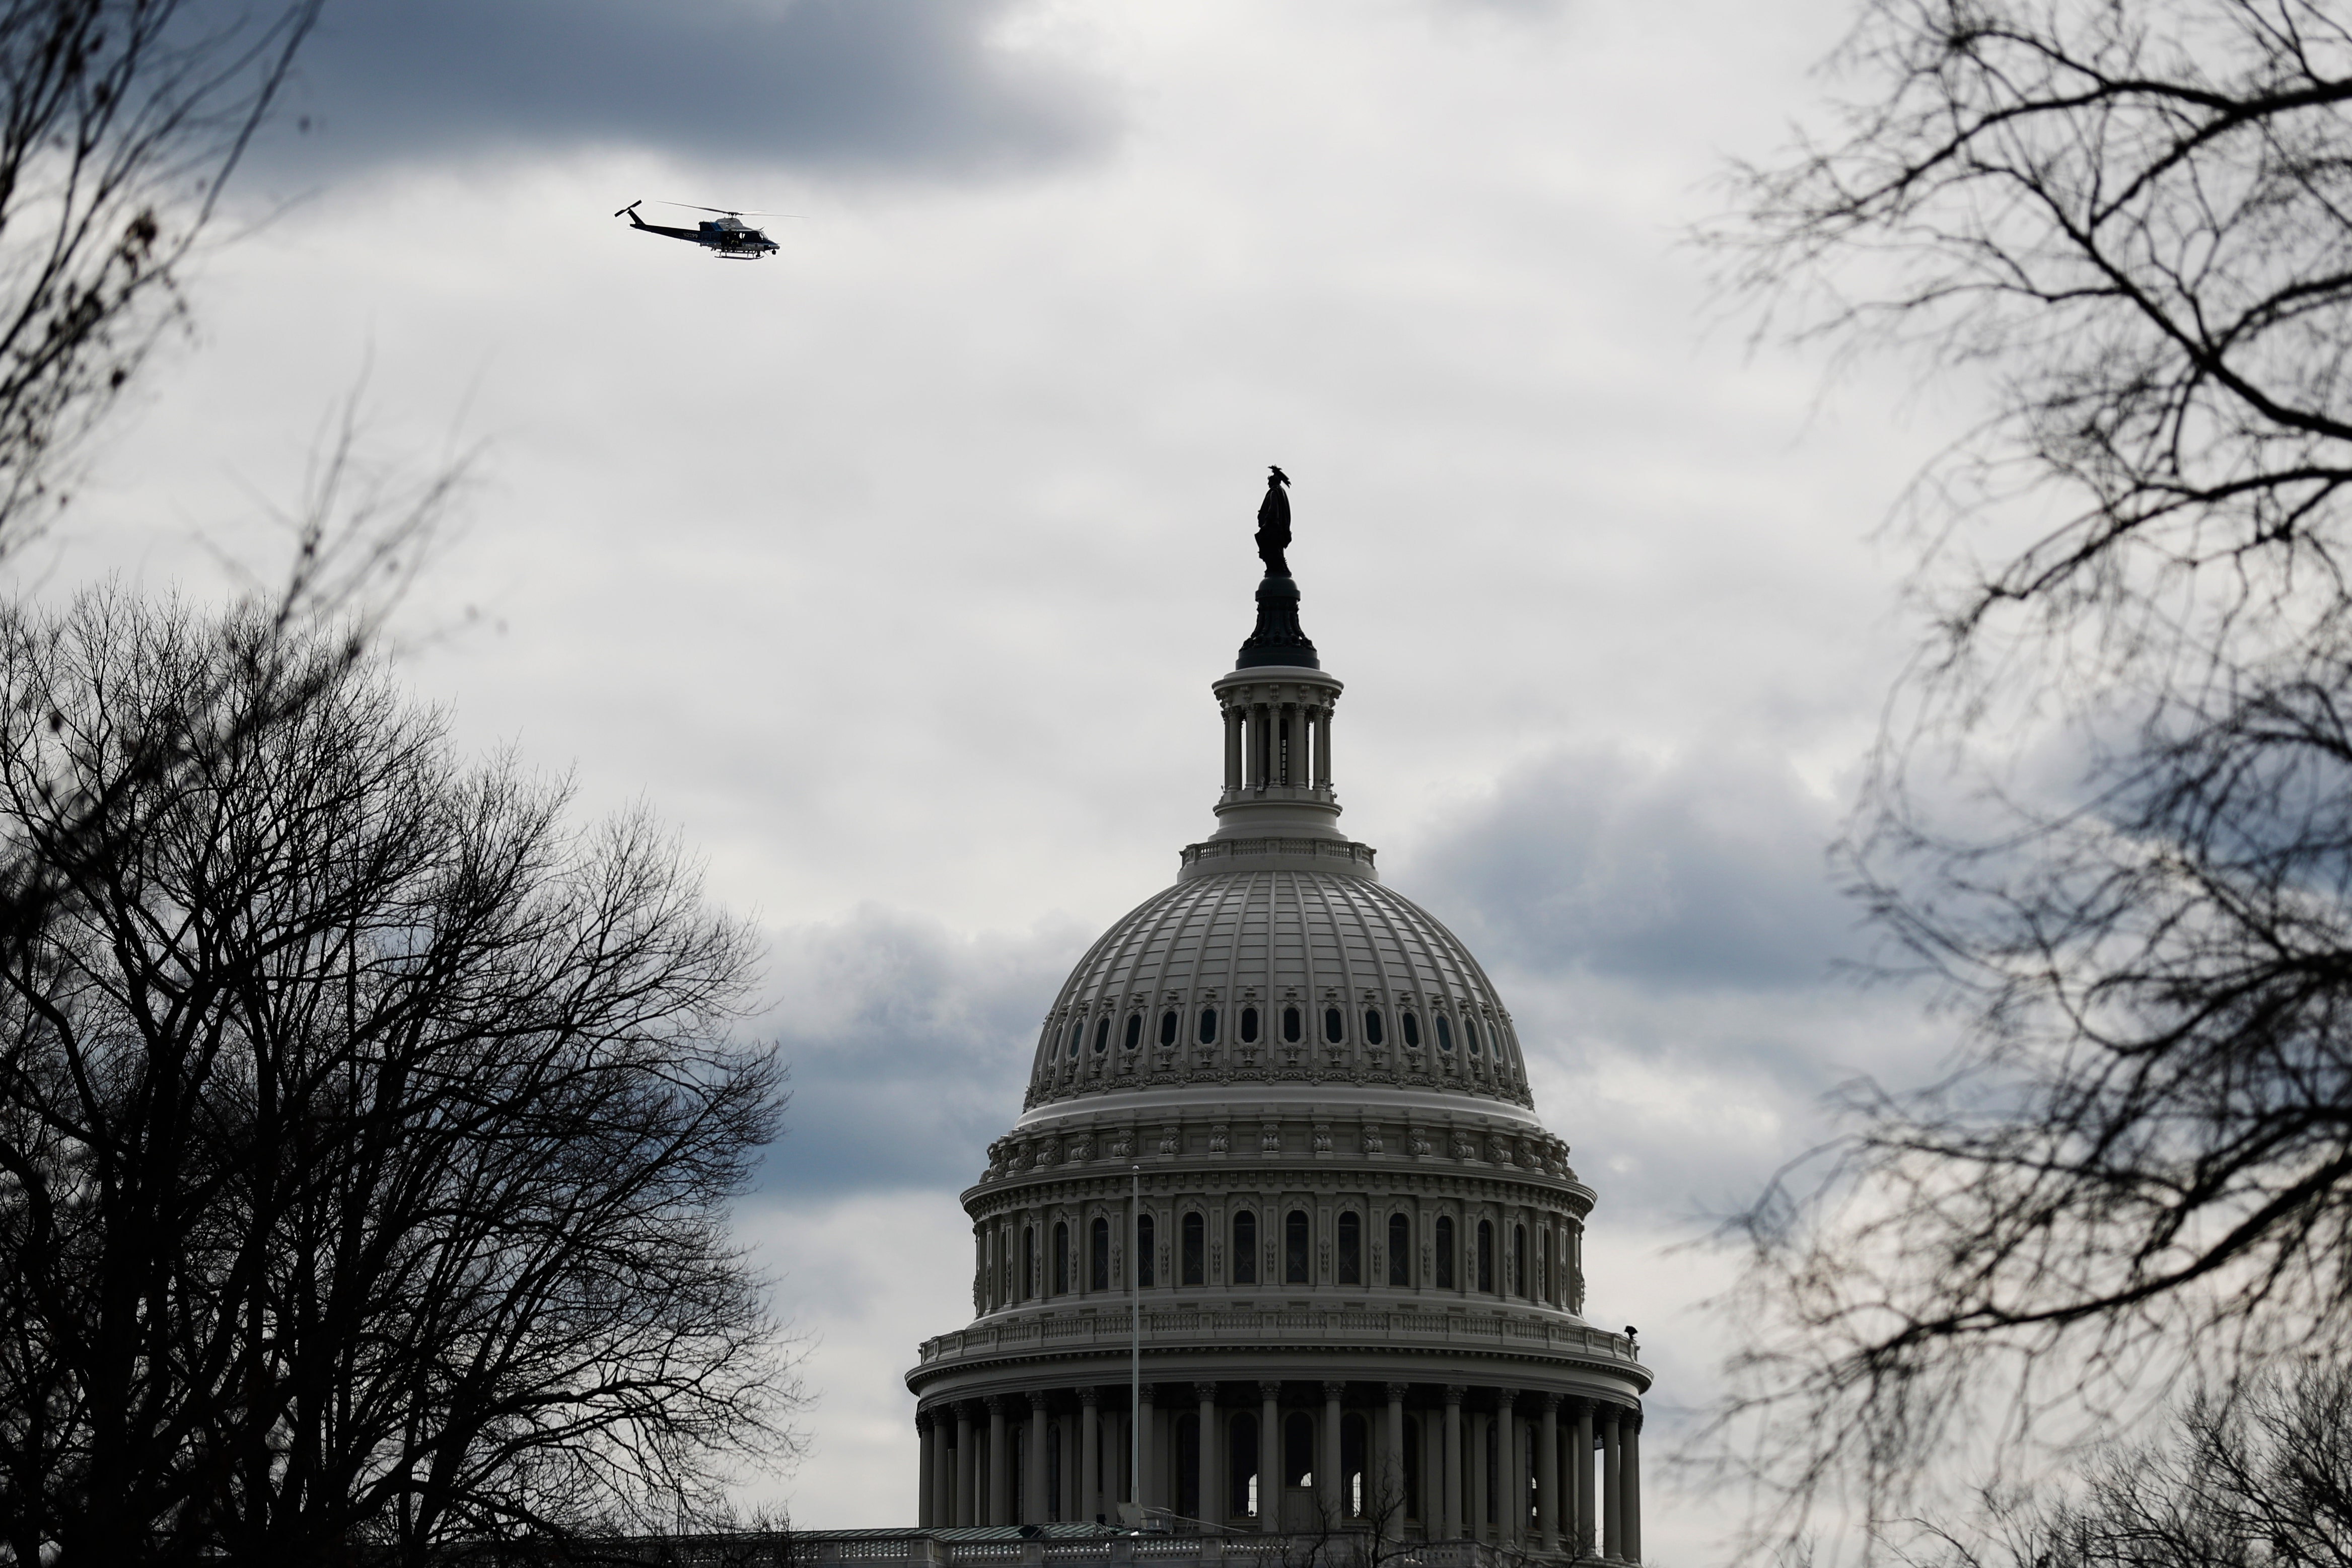 Congressman pleads for lax safety restrictions in favor of sledding as snowstorm threatens